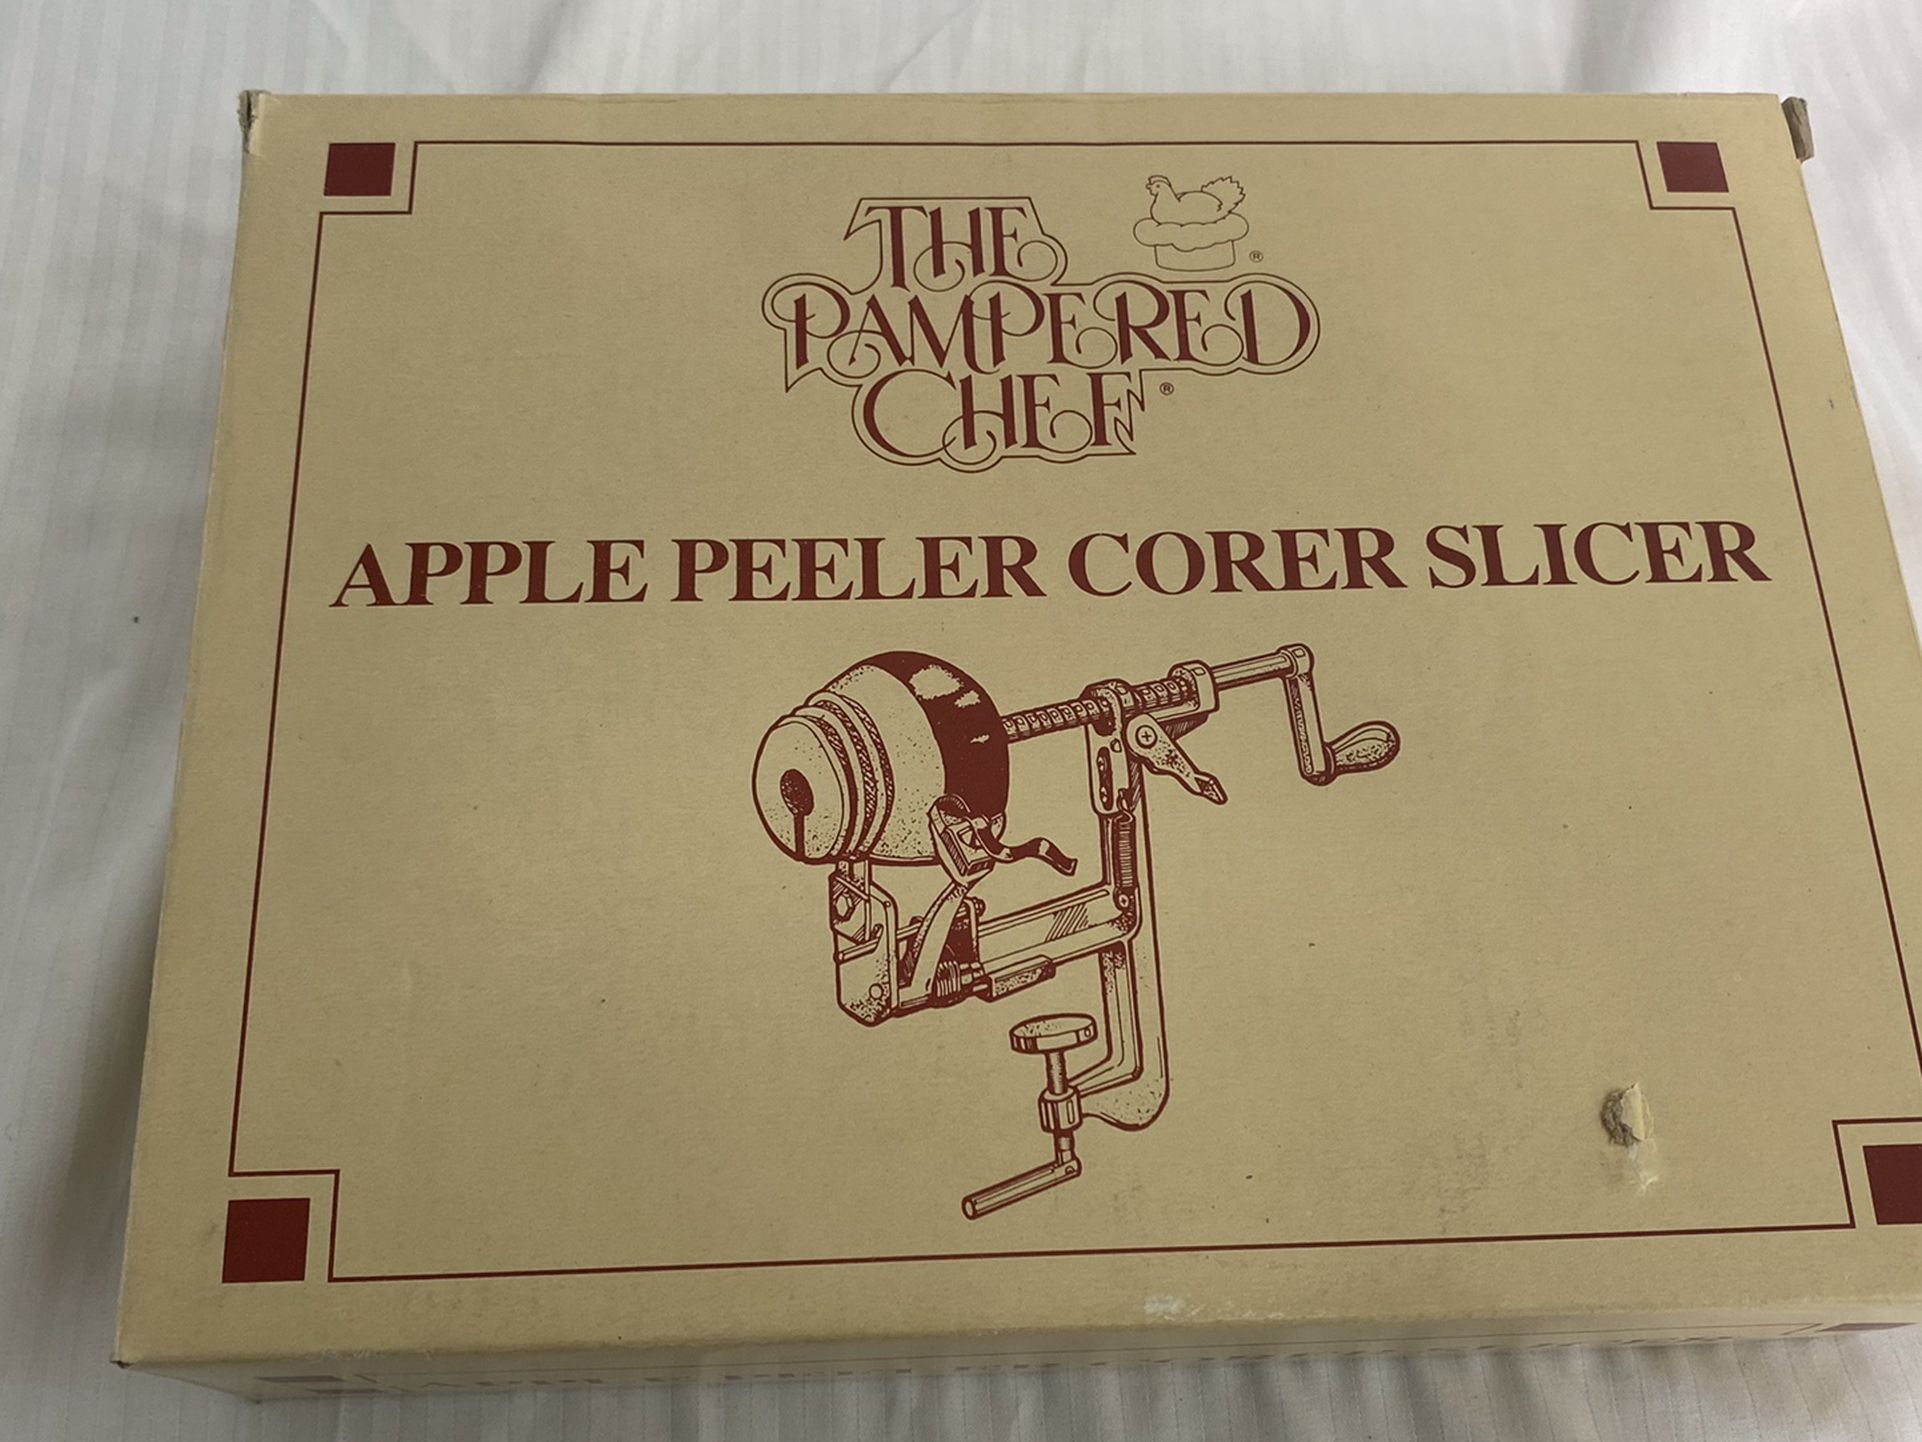 How to Use the Apple Peeler From Pampered Chef